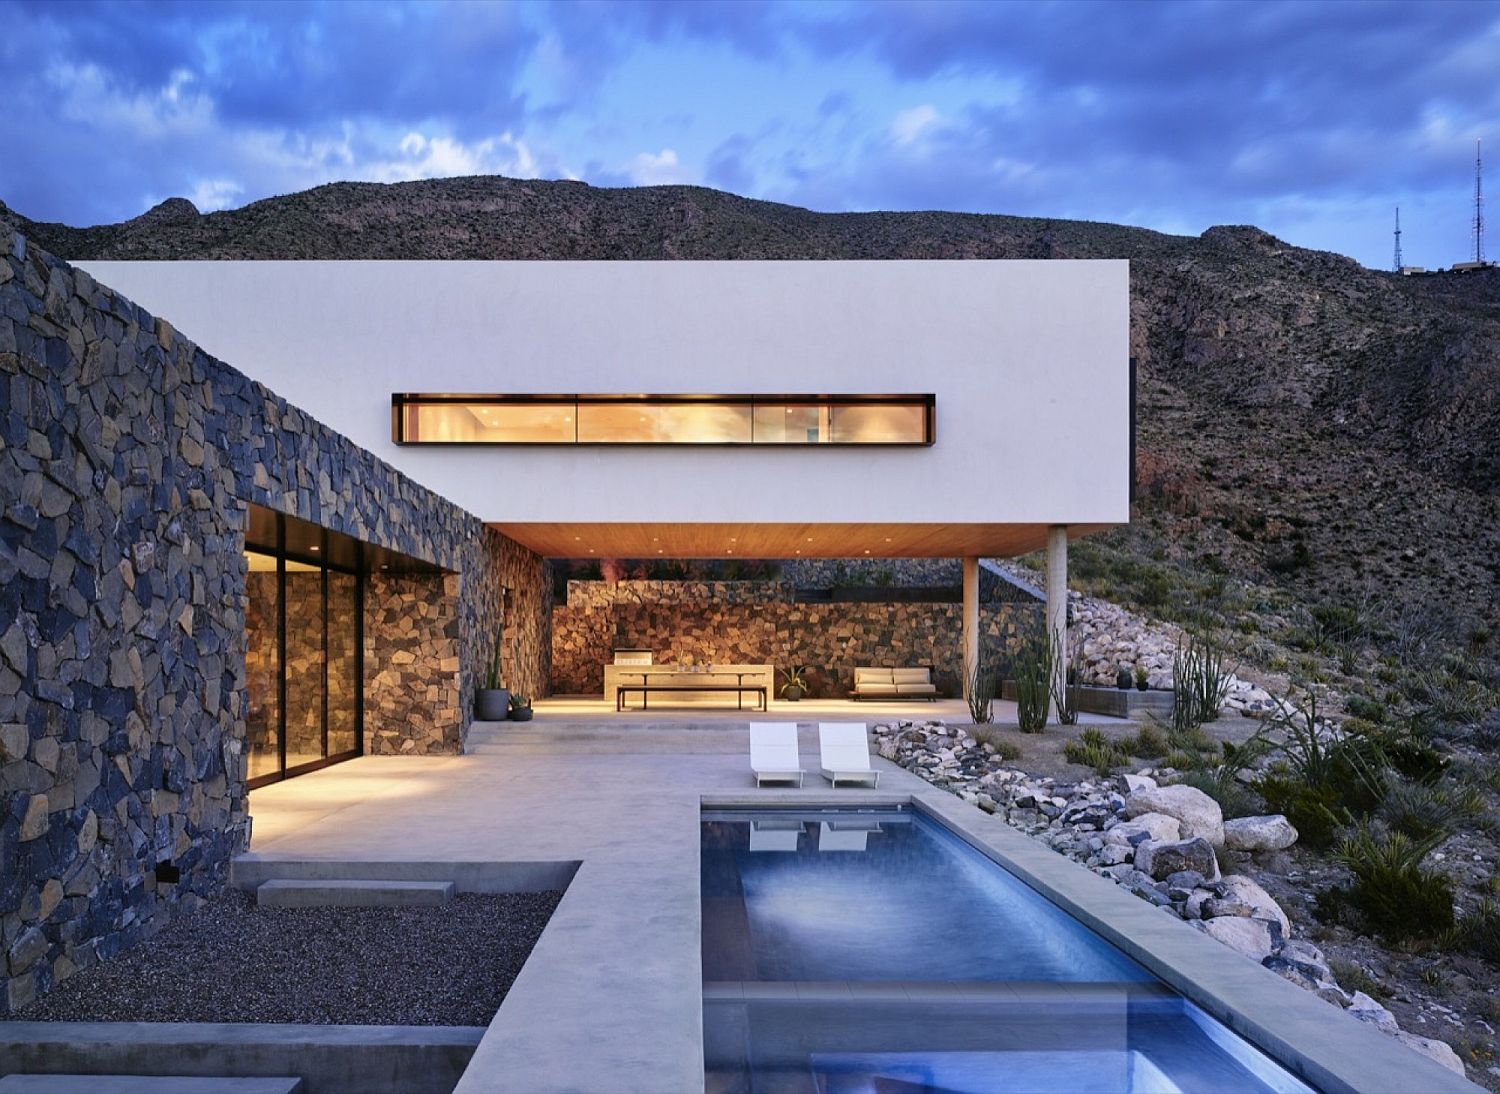 Stone and smooth troweled stucco shape the exterior of the El Paso home